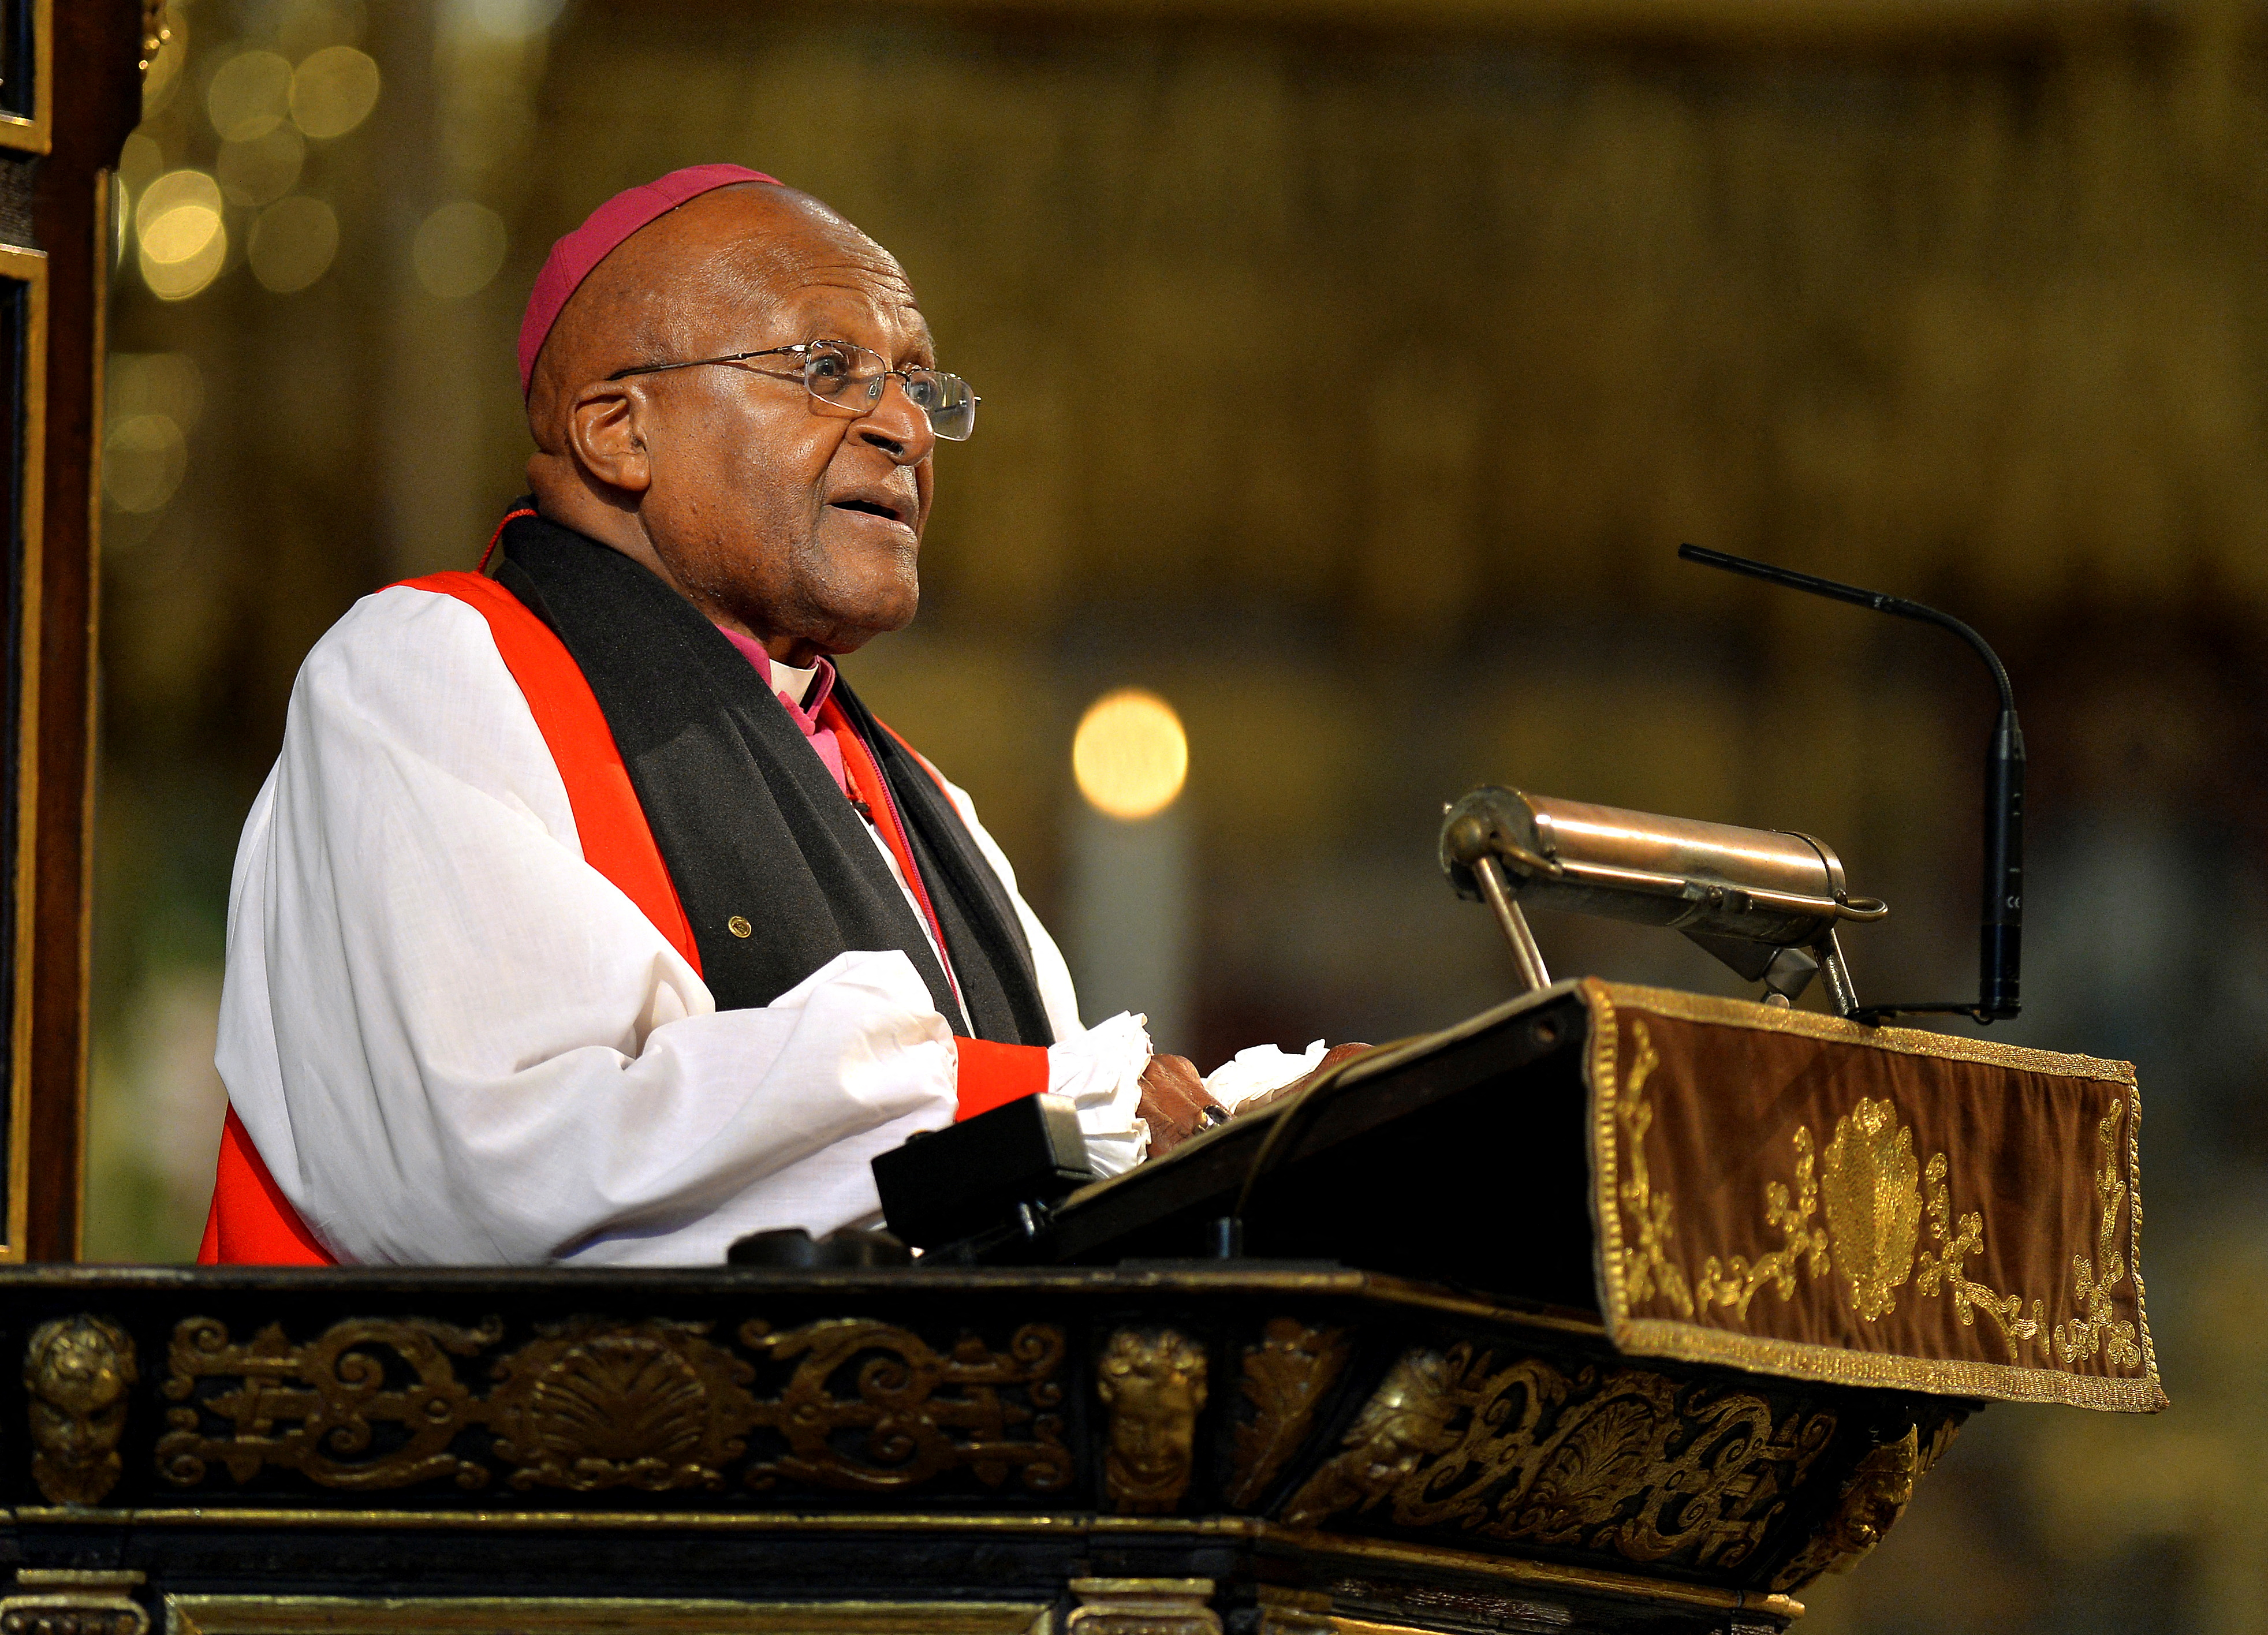 Archbishop Desmond Tutu speaks during a memorial service for former South African President Nelson Mandela at Westminster Abbey in London